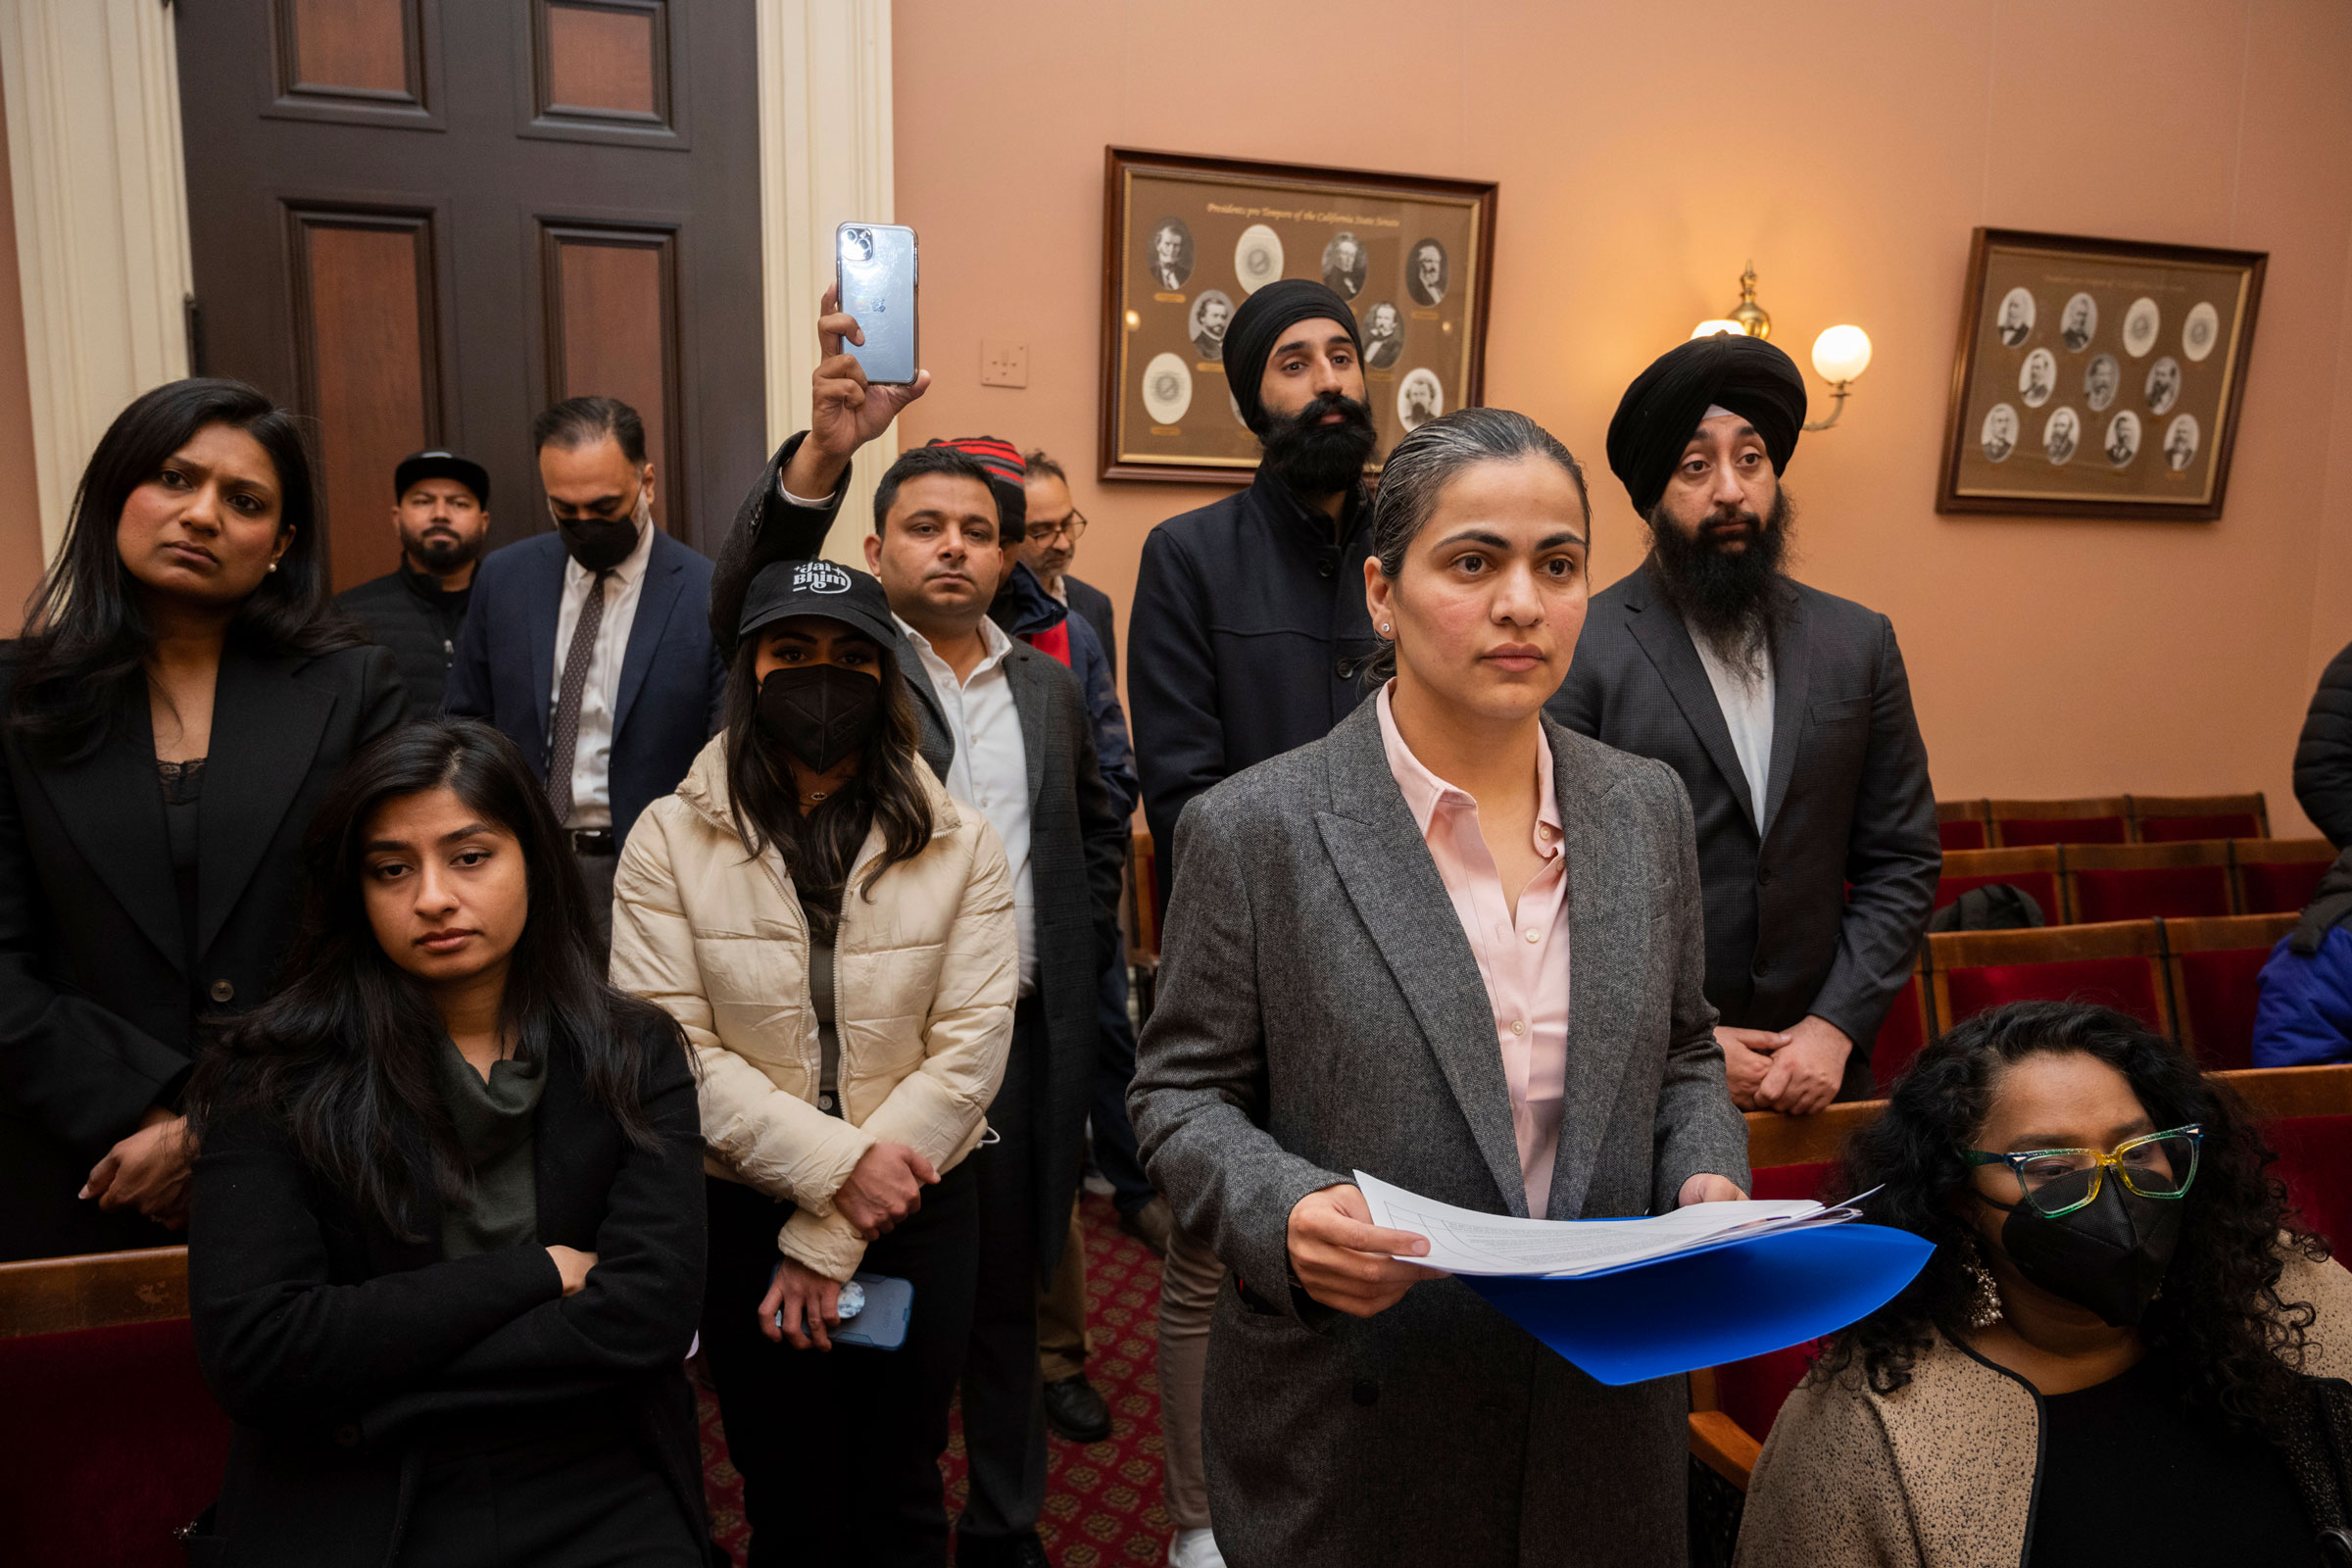 Califiornia state sen. Aisha Wahab, foreground, listens to speakers during a news conference where she proposed SB 403, a bill which adds caste as a protected category in the state’s anti-discrimination laws, in Sacramento, Calif., on March 22, 2023. (José Luis Villegas—AP)